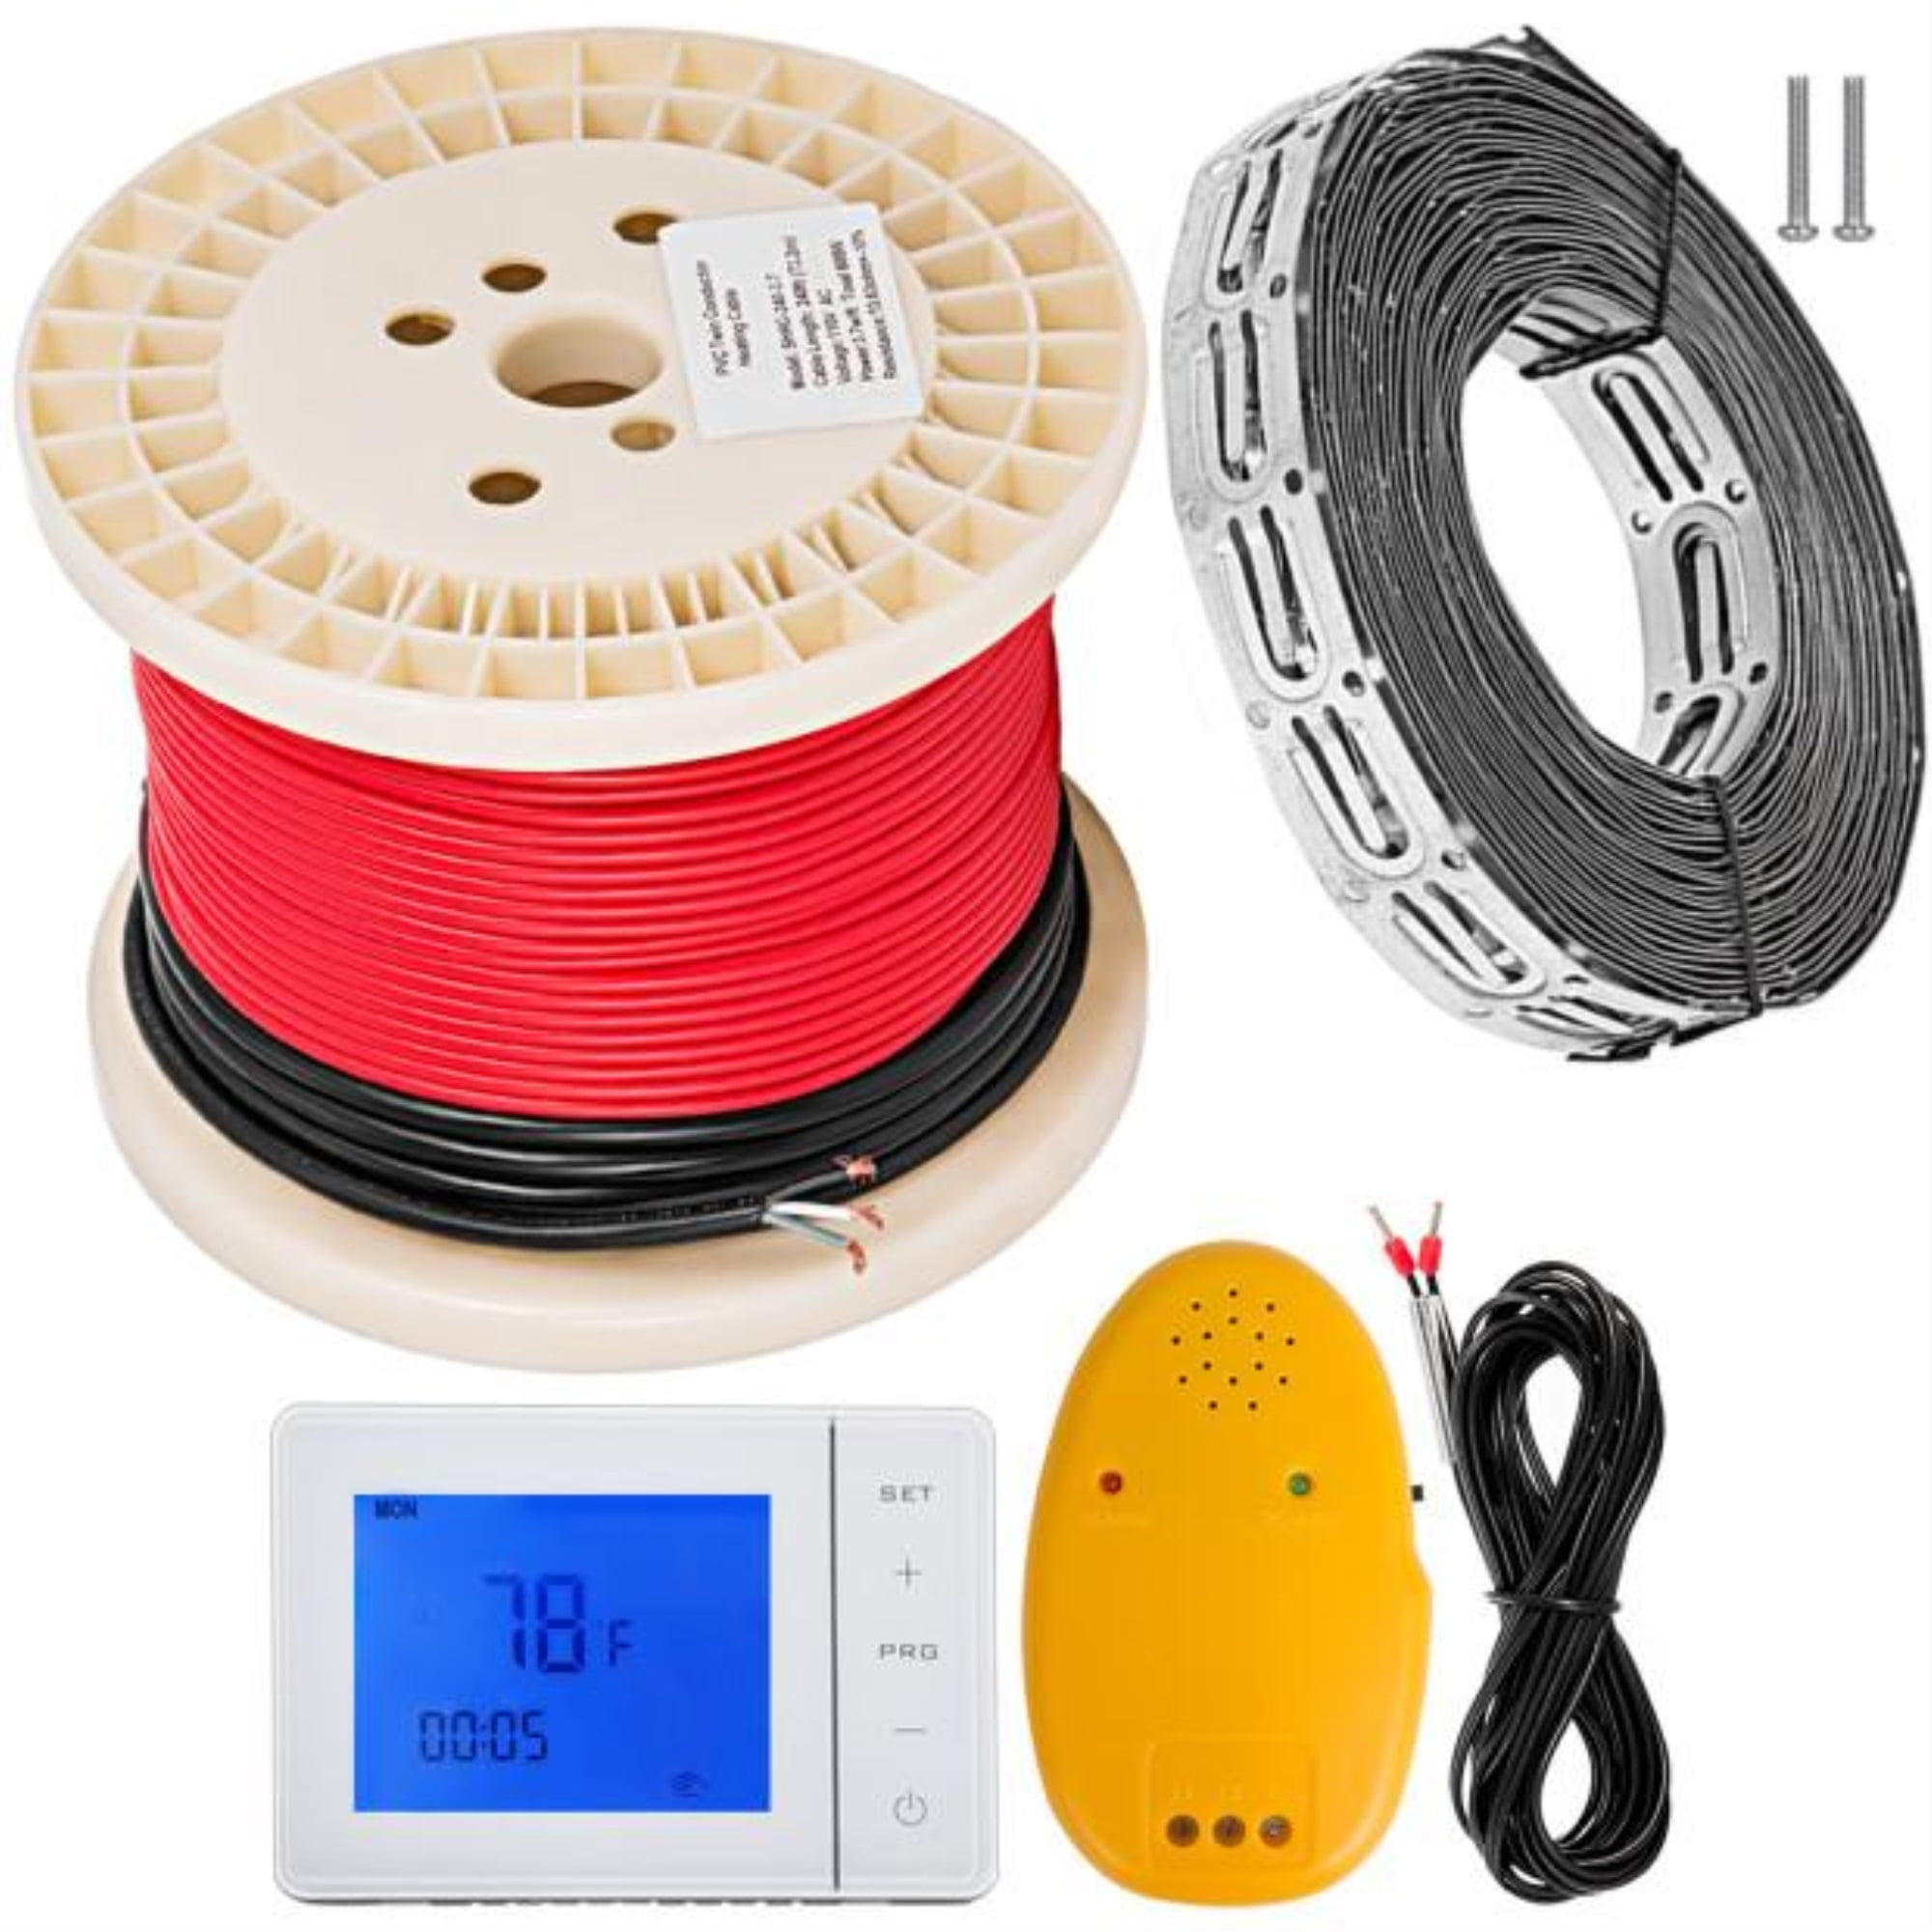 Electric Tile Radiant Warm Floor Heat Kit 10 sqft With Thermostat Cable Guides 